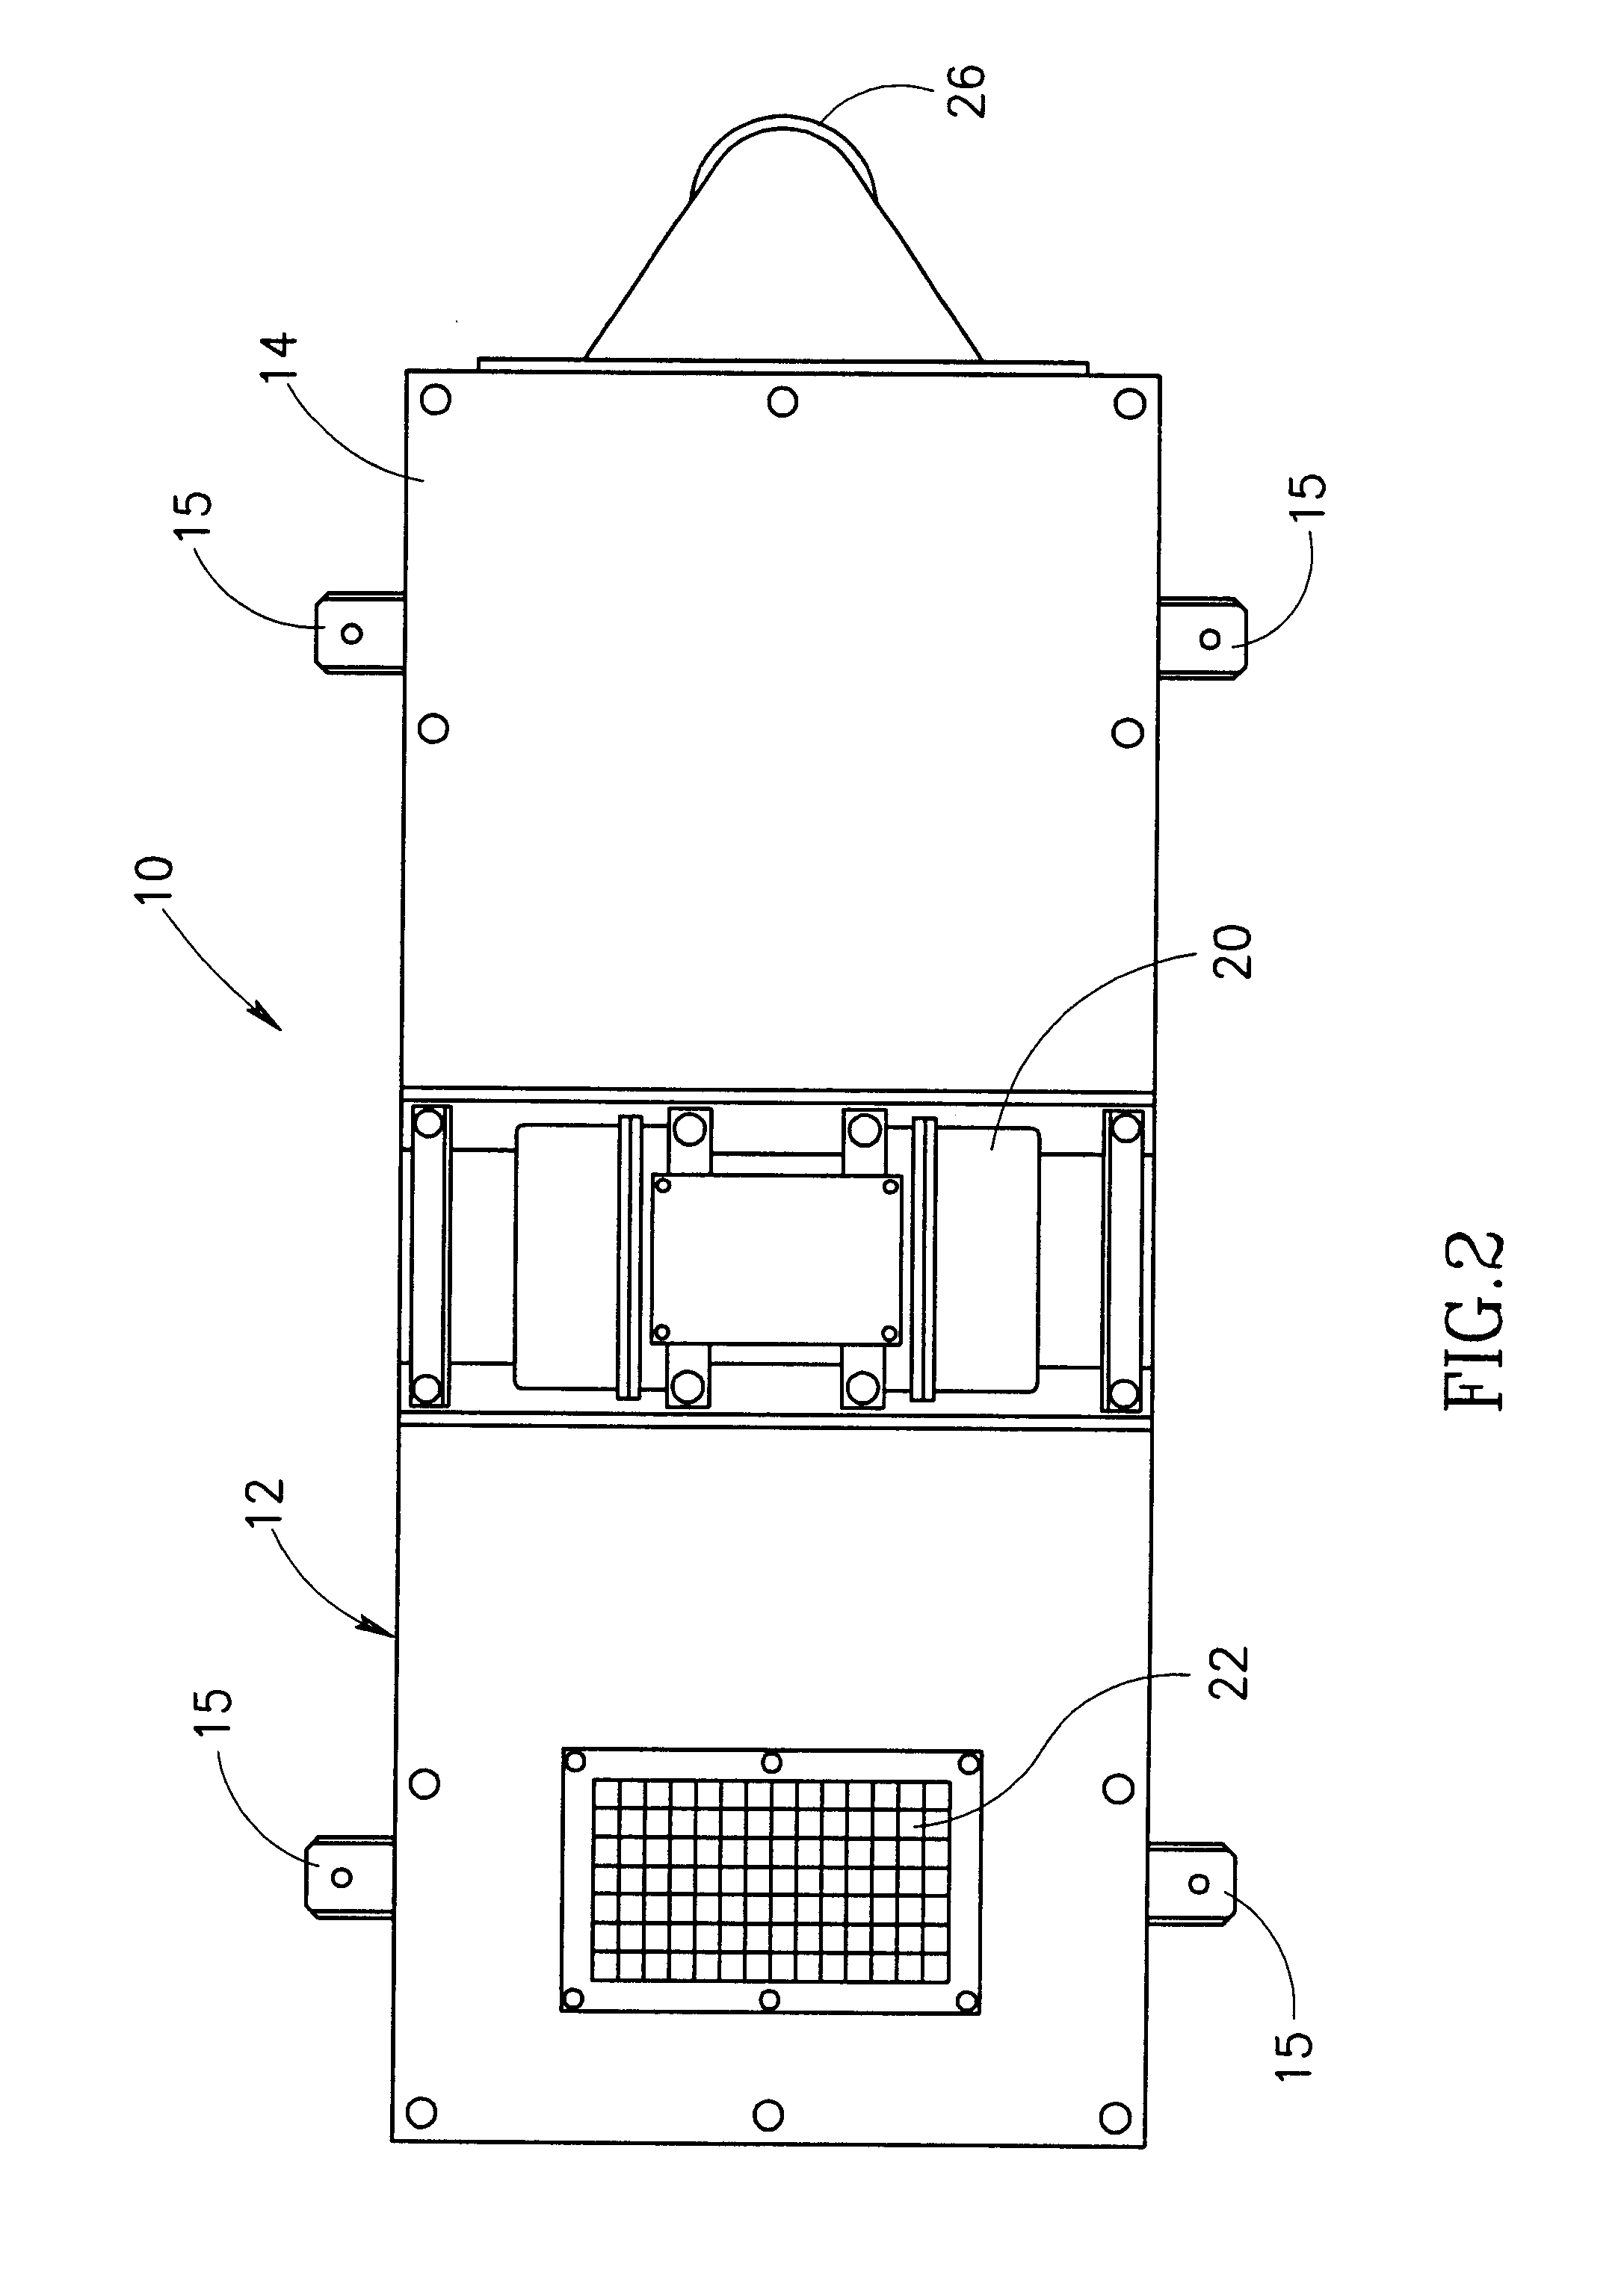 Multifrequency vibratory separator system, a vibratory separator including same, and a method of vibratory separation of solids